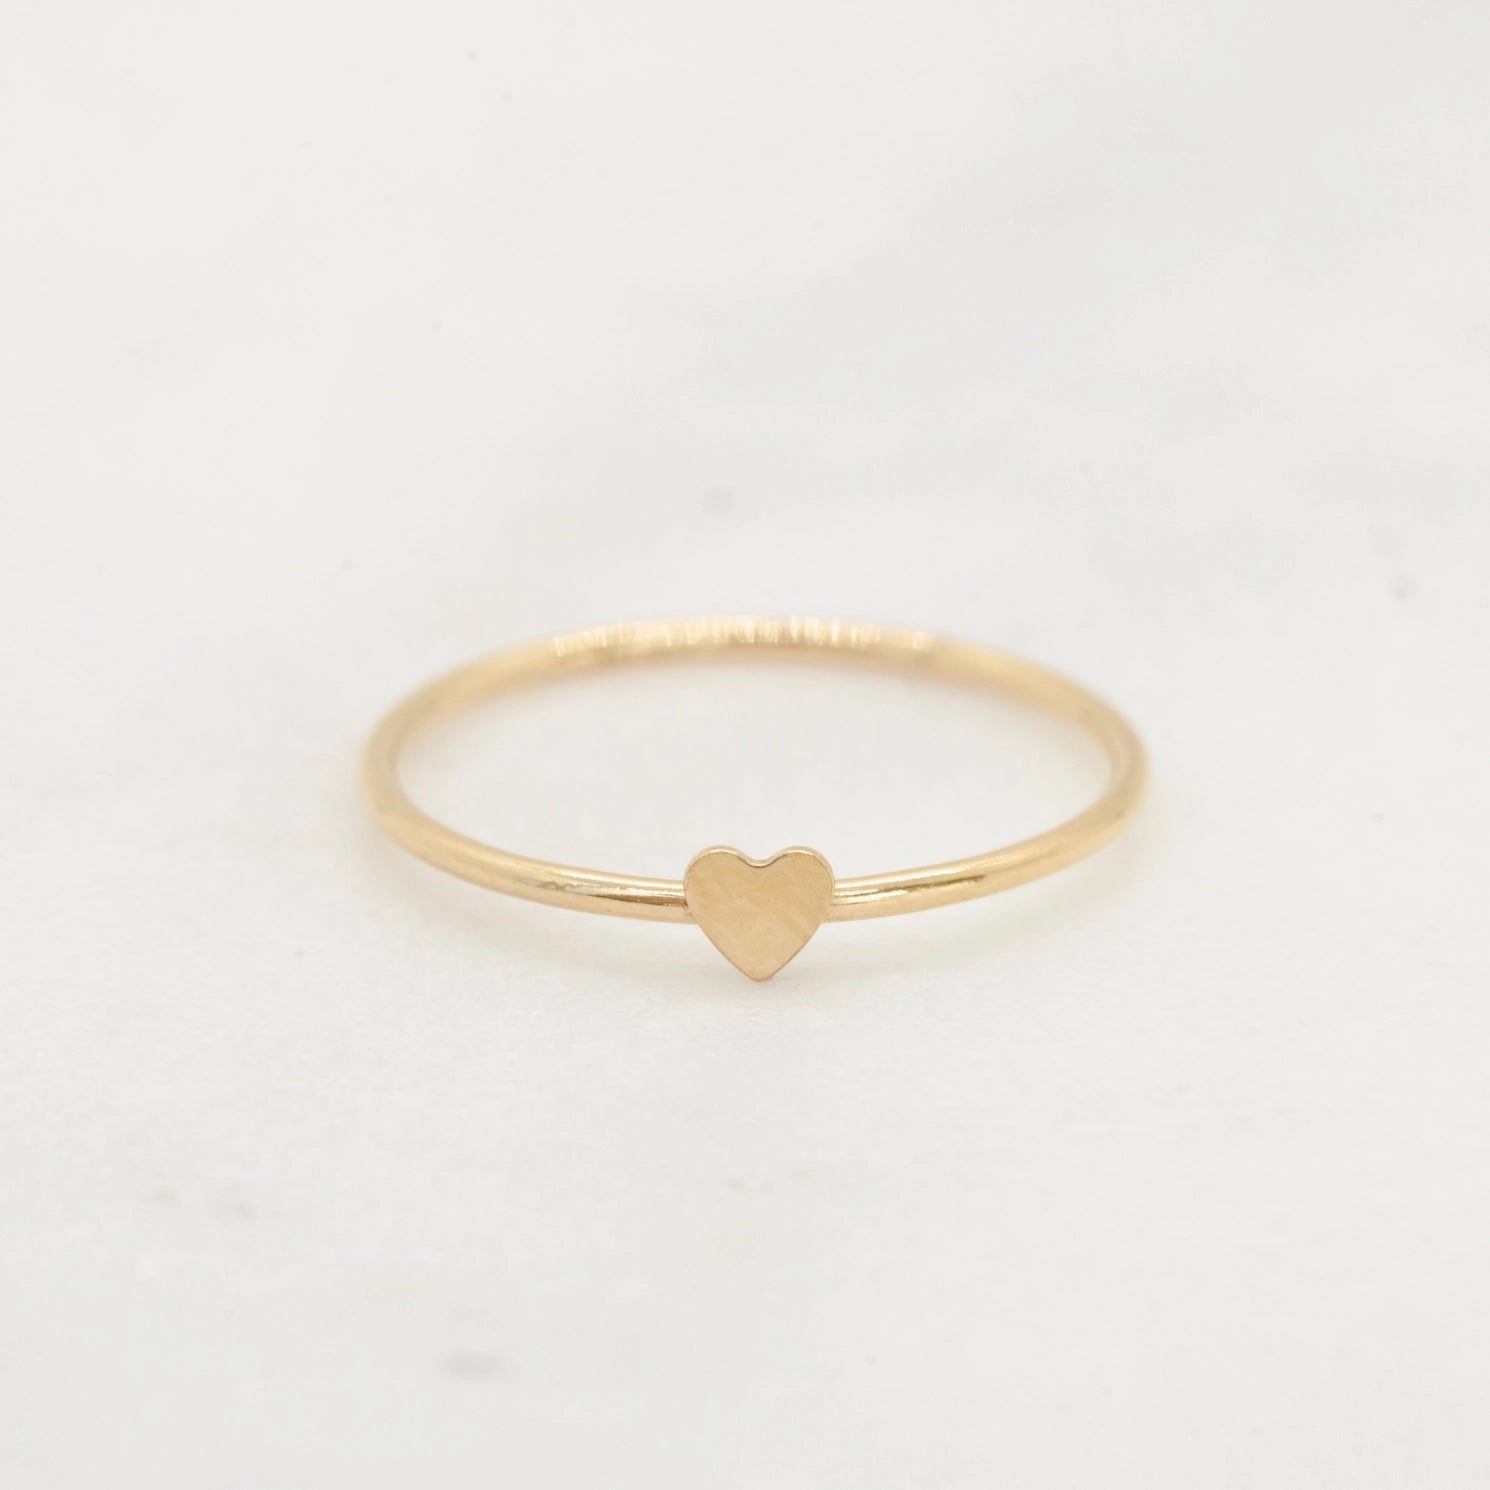 paris ring by Petite Gold